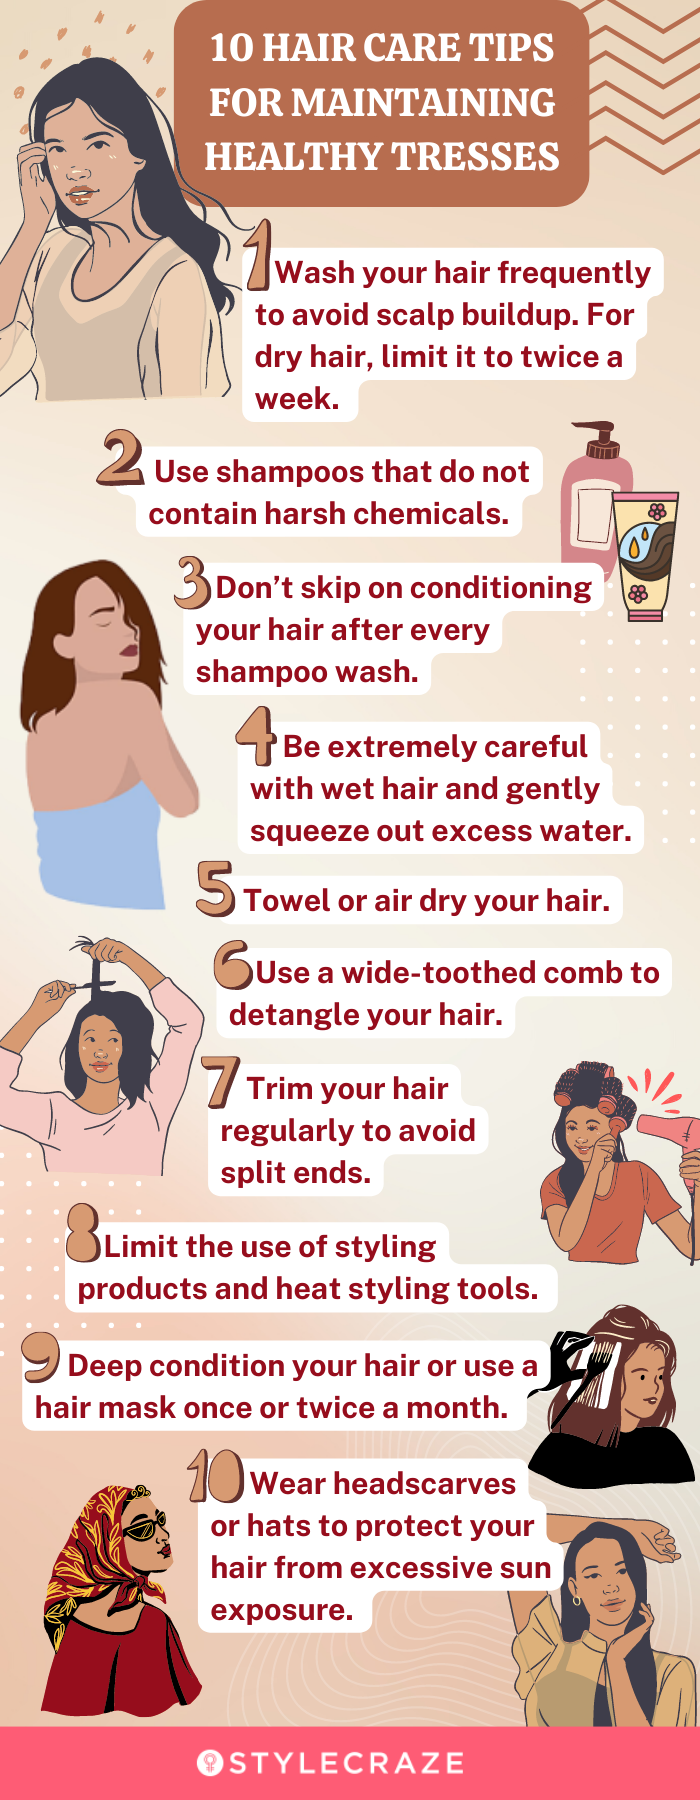 10 hair care tips for maintaining healthy tresses (infographic)